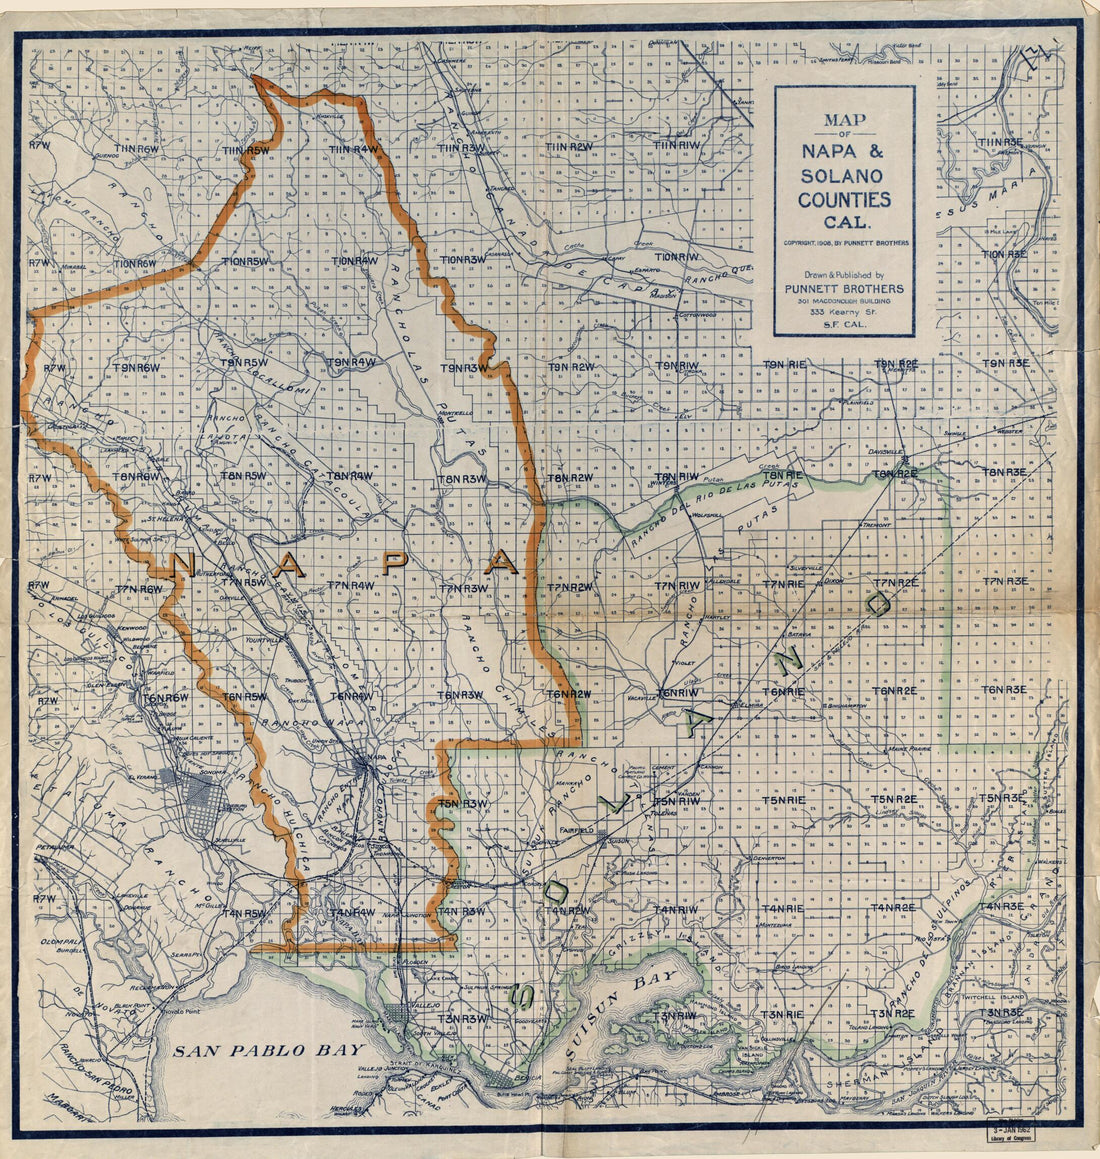 This old map of Map of Napa &amp; Solano CountiesCalifornia (Map of Napa and Solano Counties, Cal) from 1908 was created by  Punnett Brothers in 1908